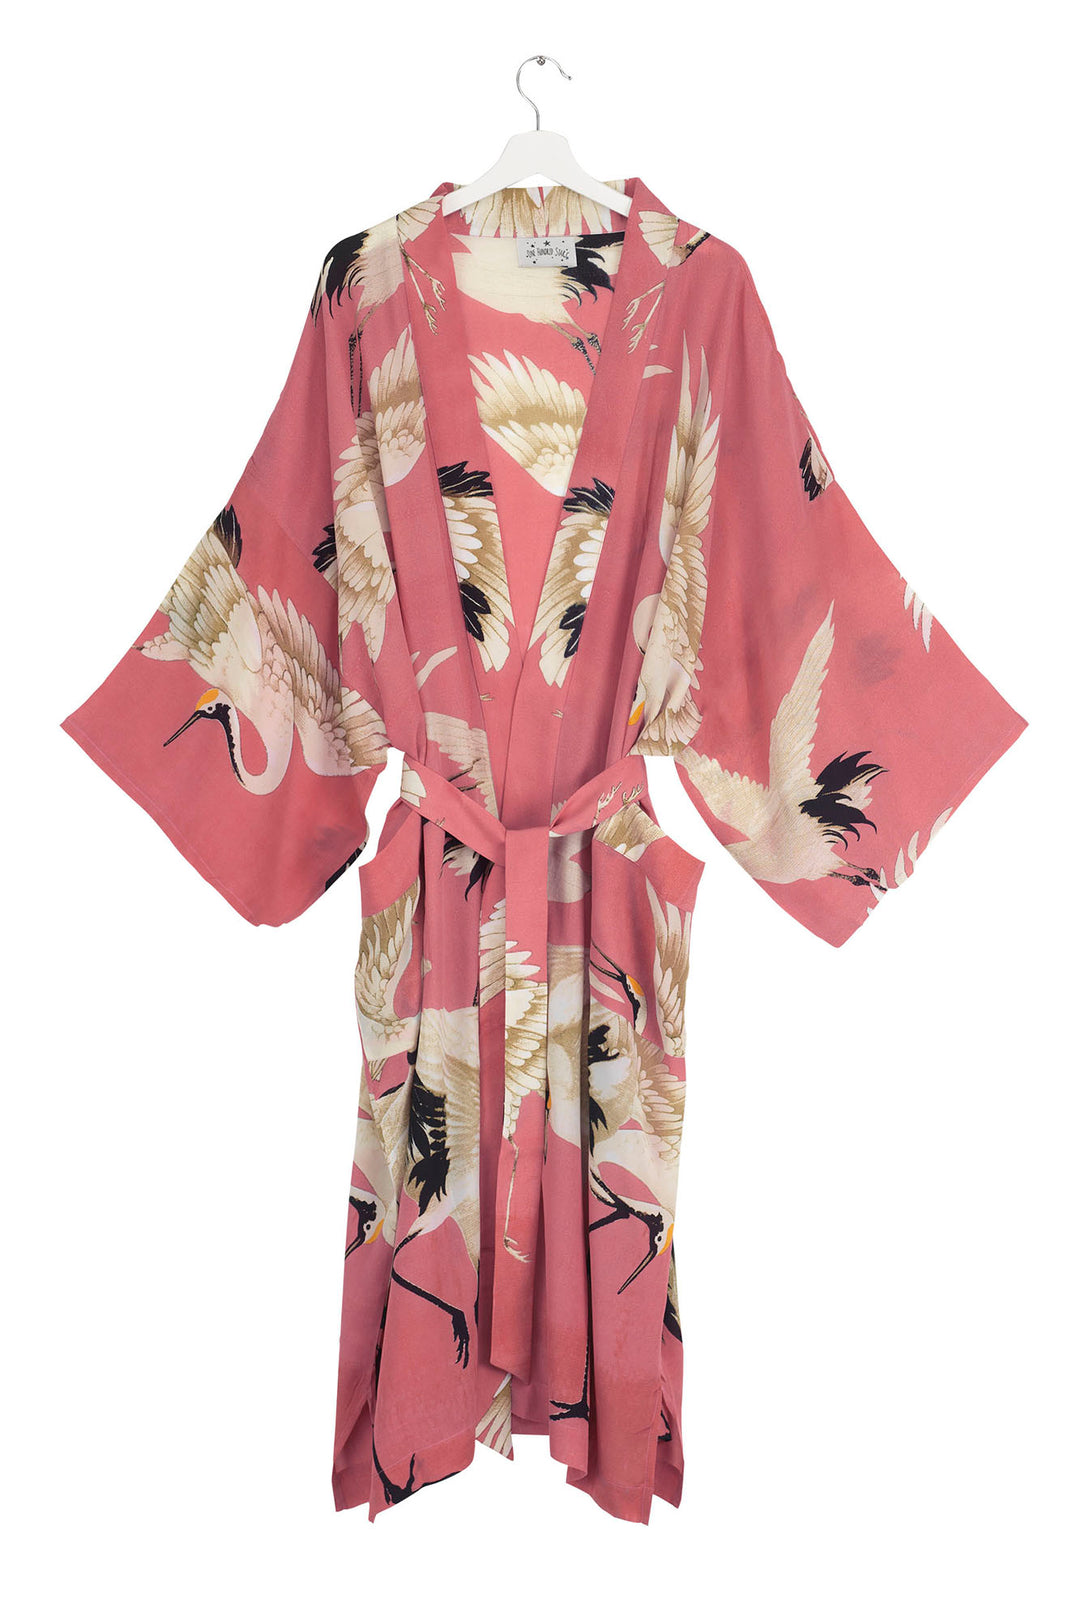 The One Hundred Stars Stork Crane Lipstick Pink Crepe Long Kimono can be worn two ways, when tied at the back it makes a chic open fronted jacket. Alternatively, it can be worn tied at the front as a closed jacket or dress and secured using the interior waist tie.